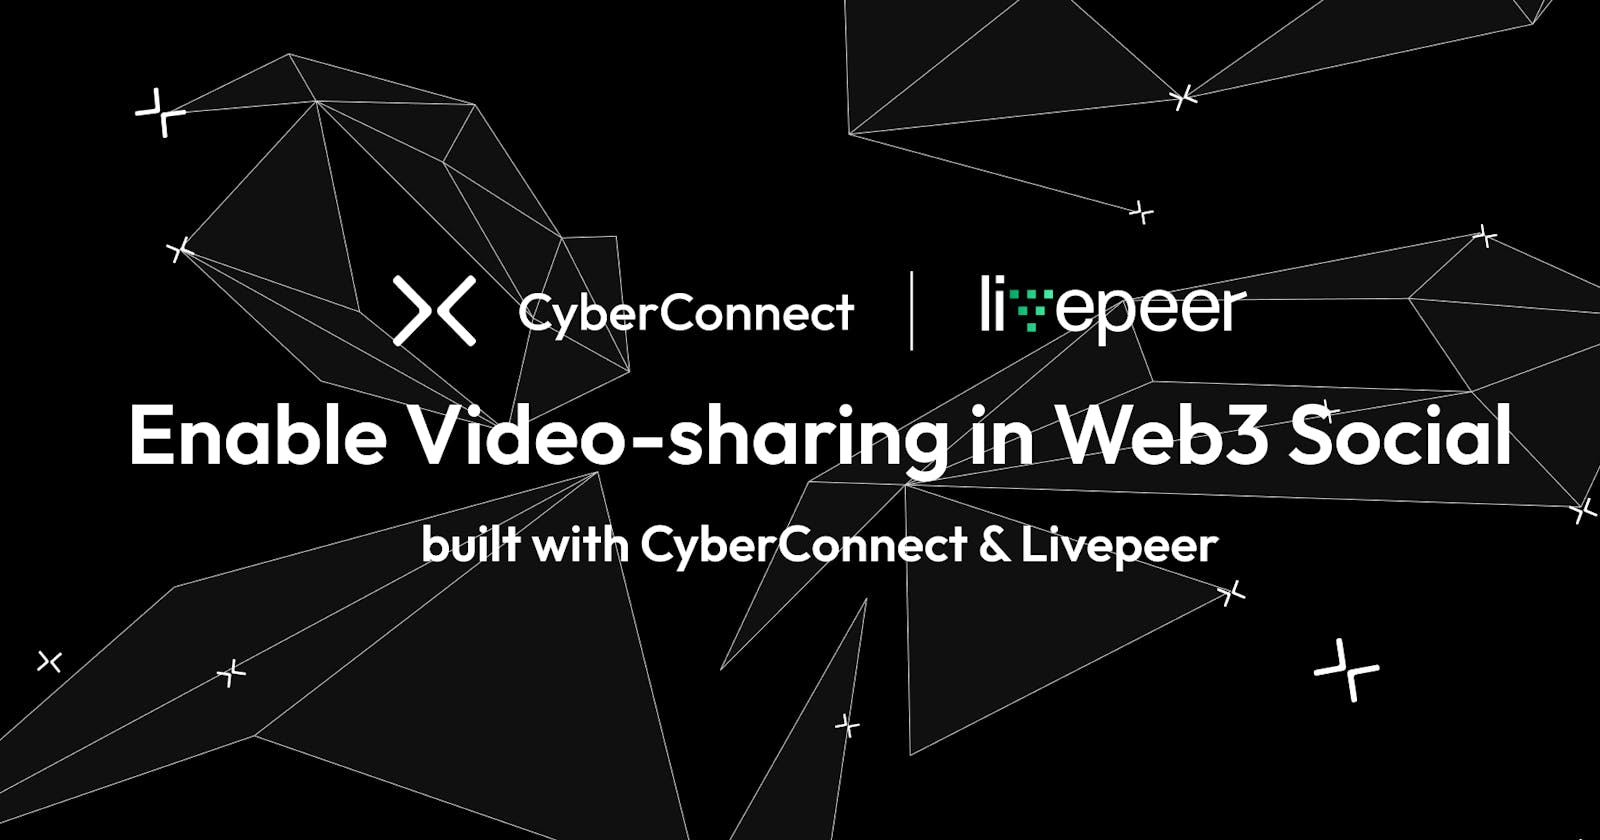 CyberTube: A decentralized video-sharing platform built on CyberConnect using Livepeer